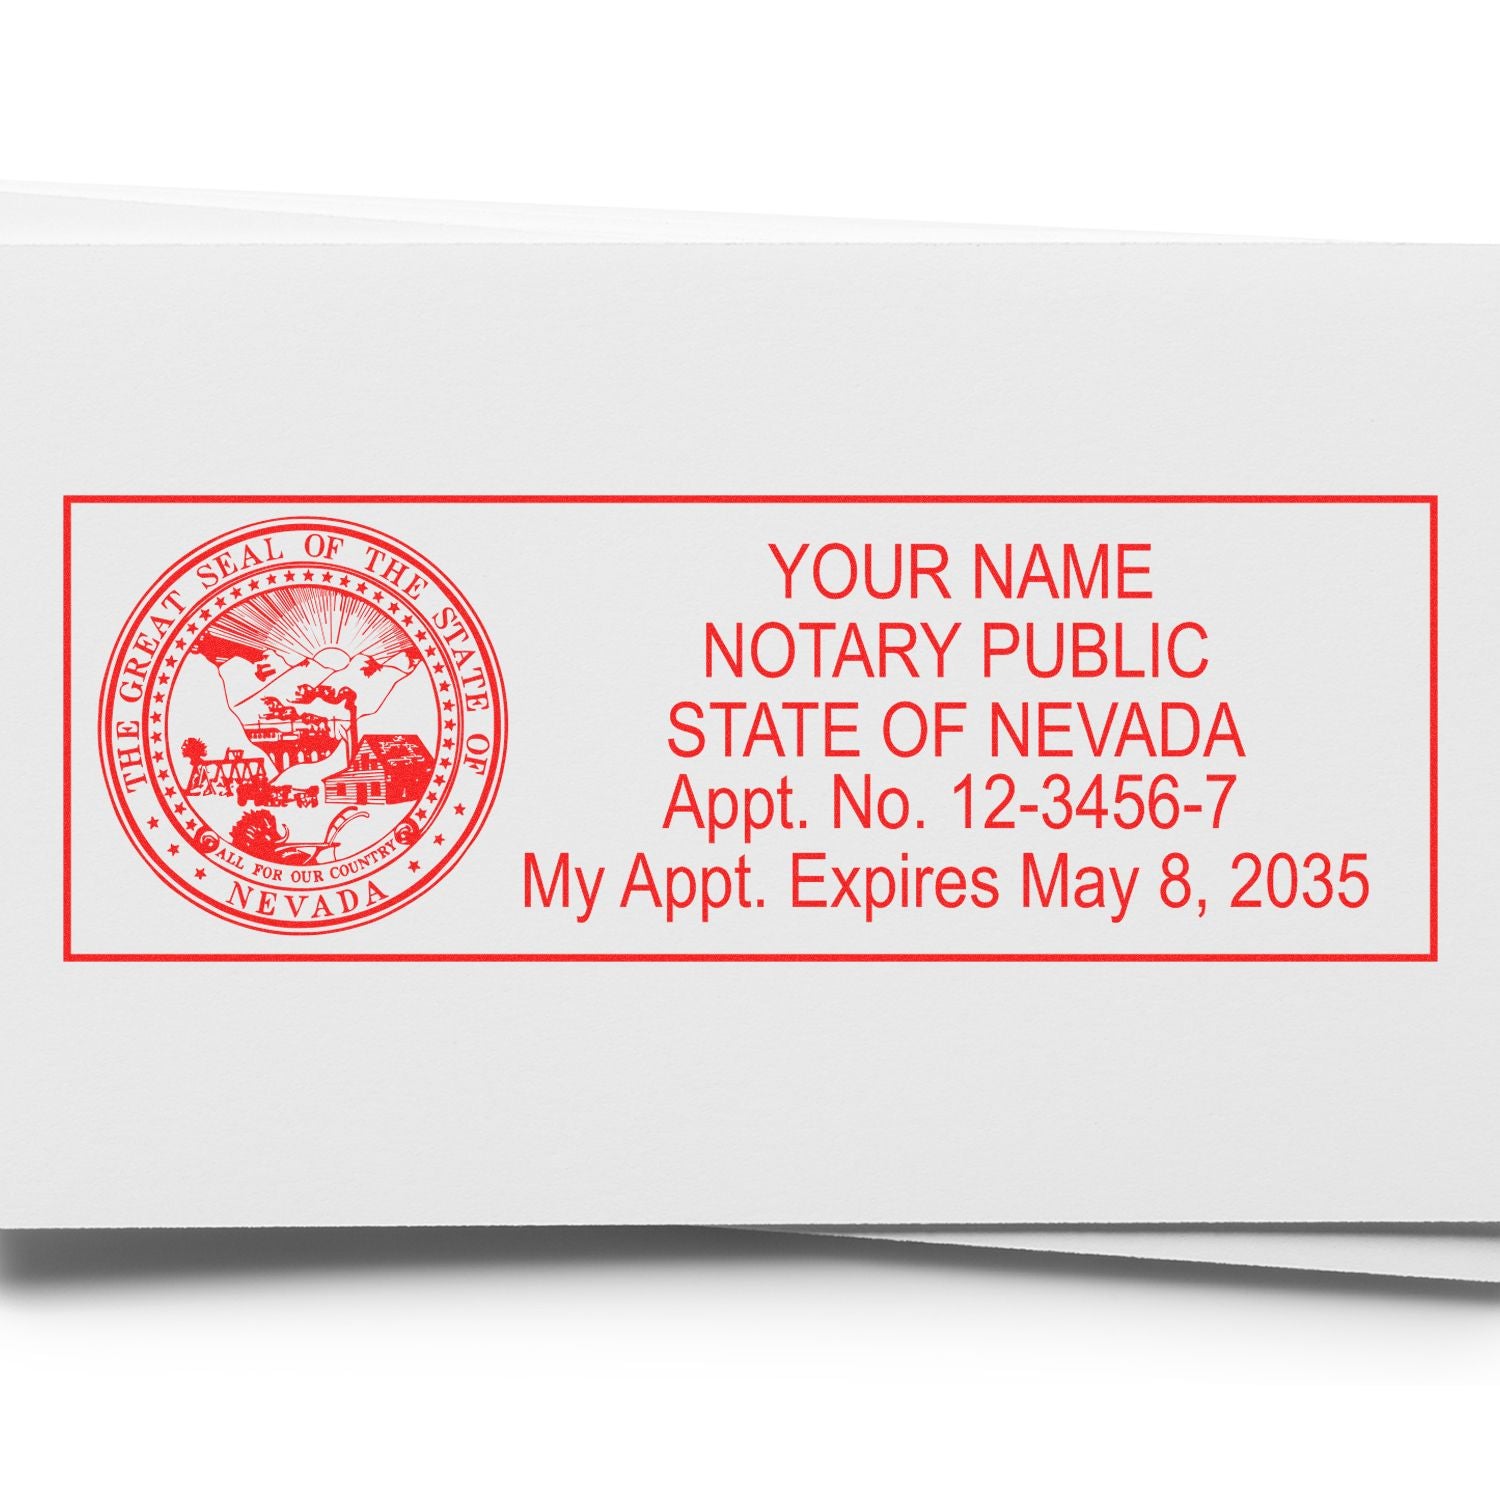 The main image for the PSI Nevada Notary Stamp depicting a sample of the imprint and electronic files